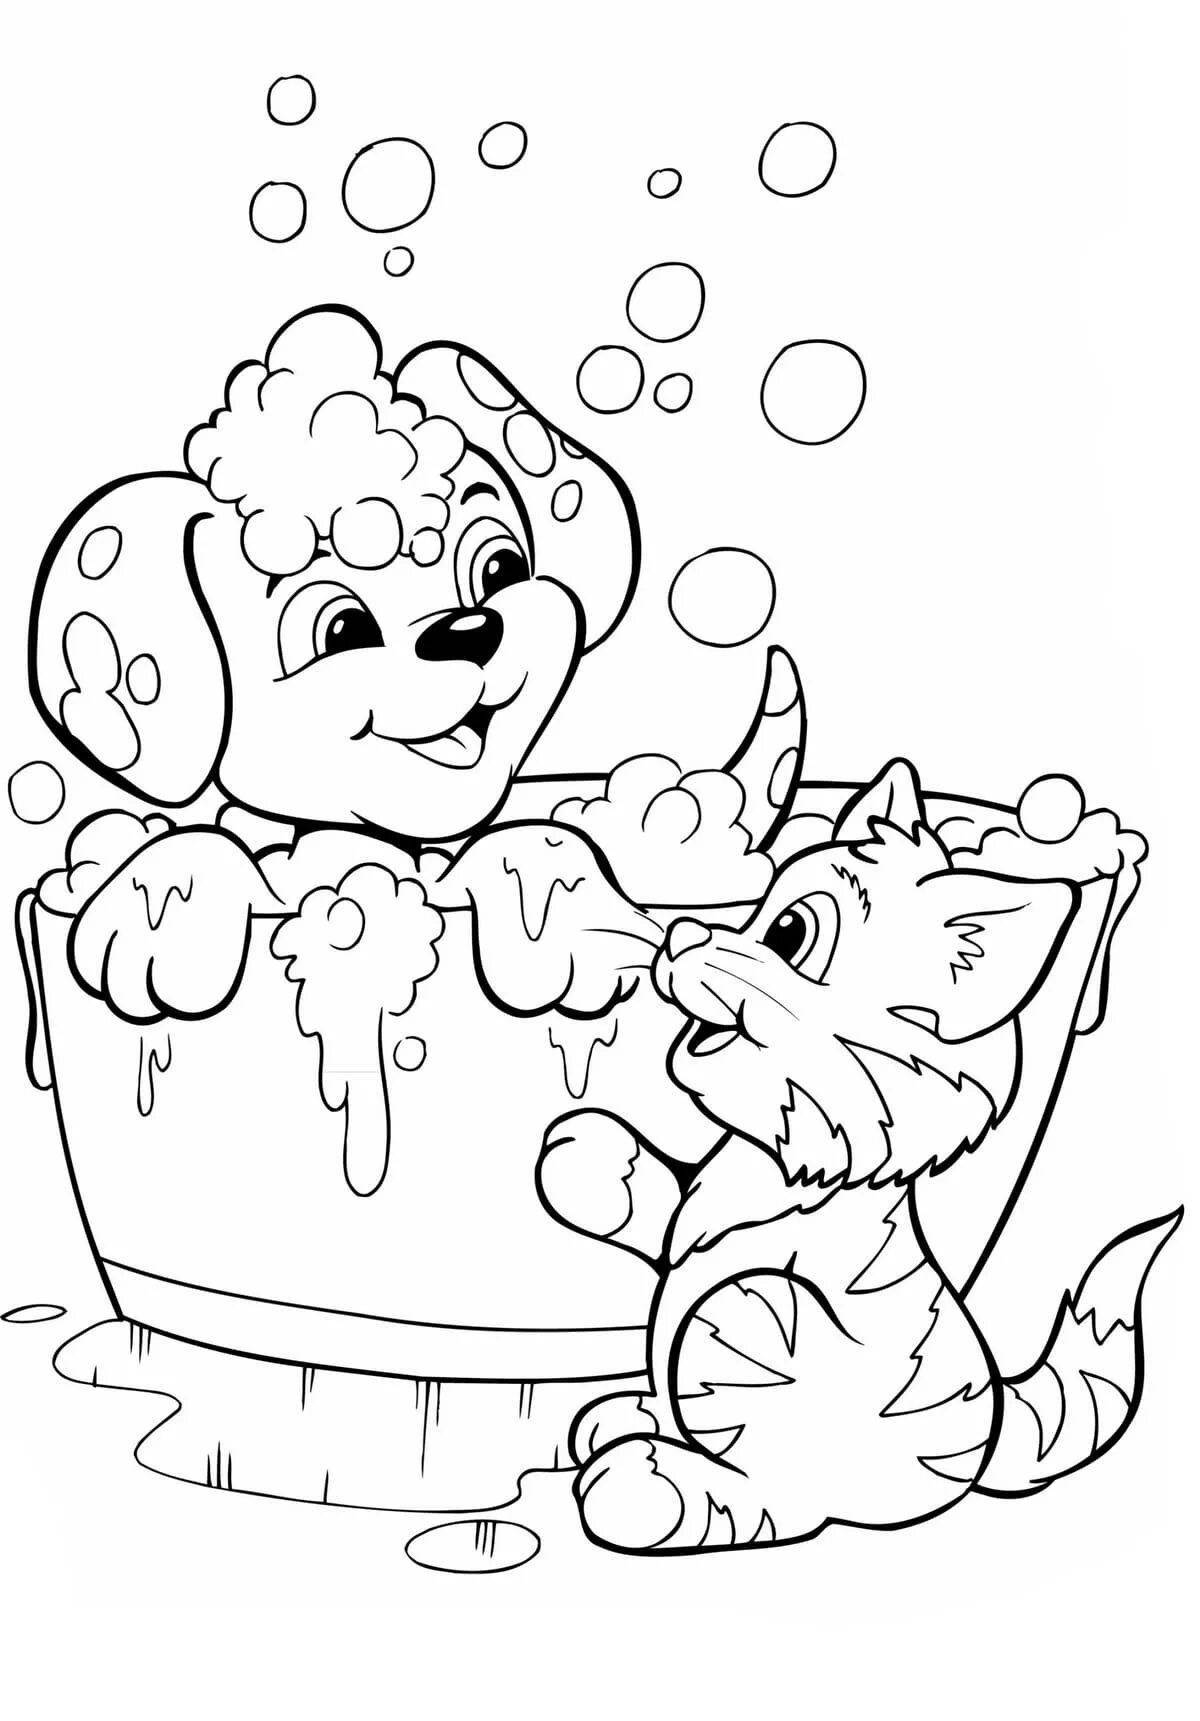 Animated cat and dog coloring page